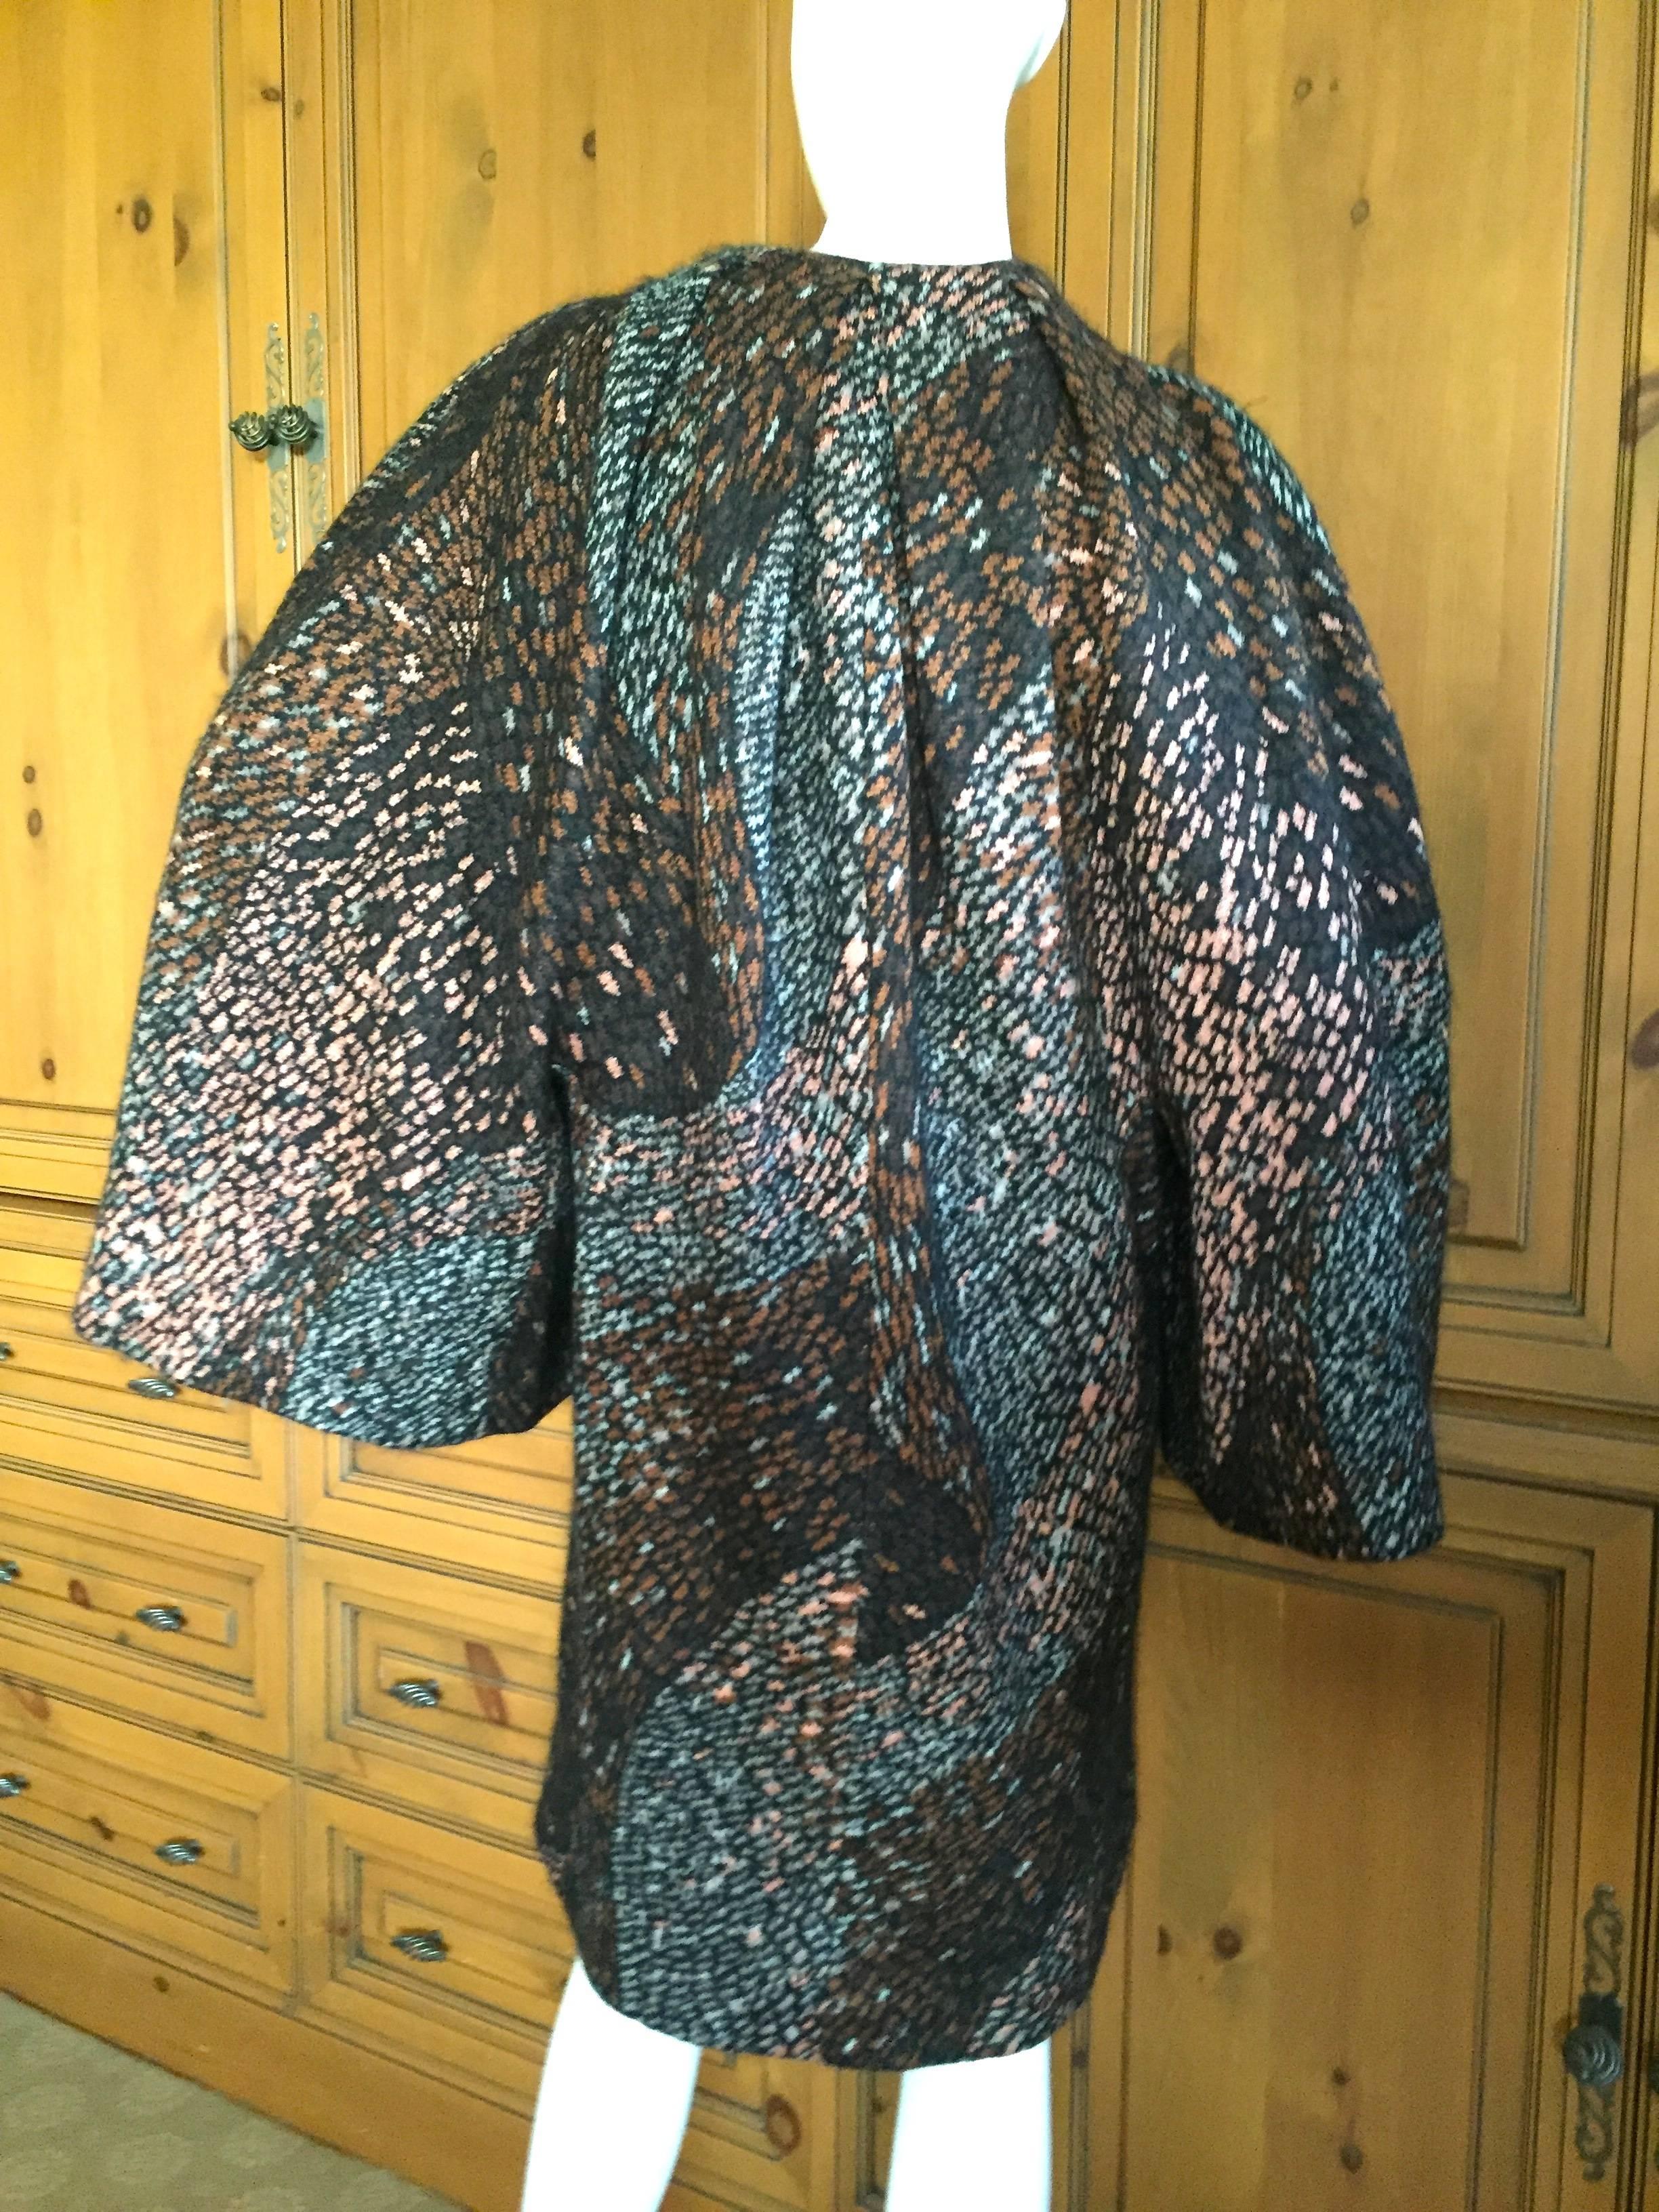 Darkly romantic cape coat from Missoni circa 1990.
Patterned in a mosaic like effect, this is an extremely soft blend of wool silk and mohair.
Bust 44